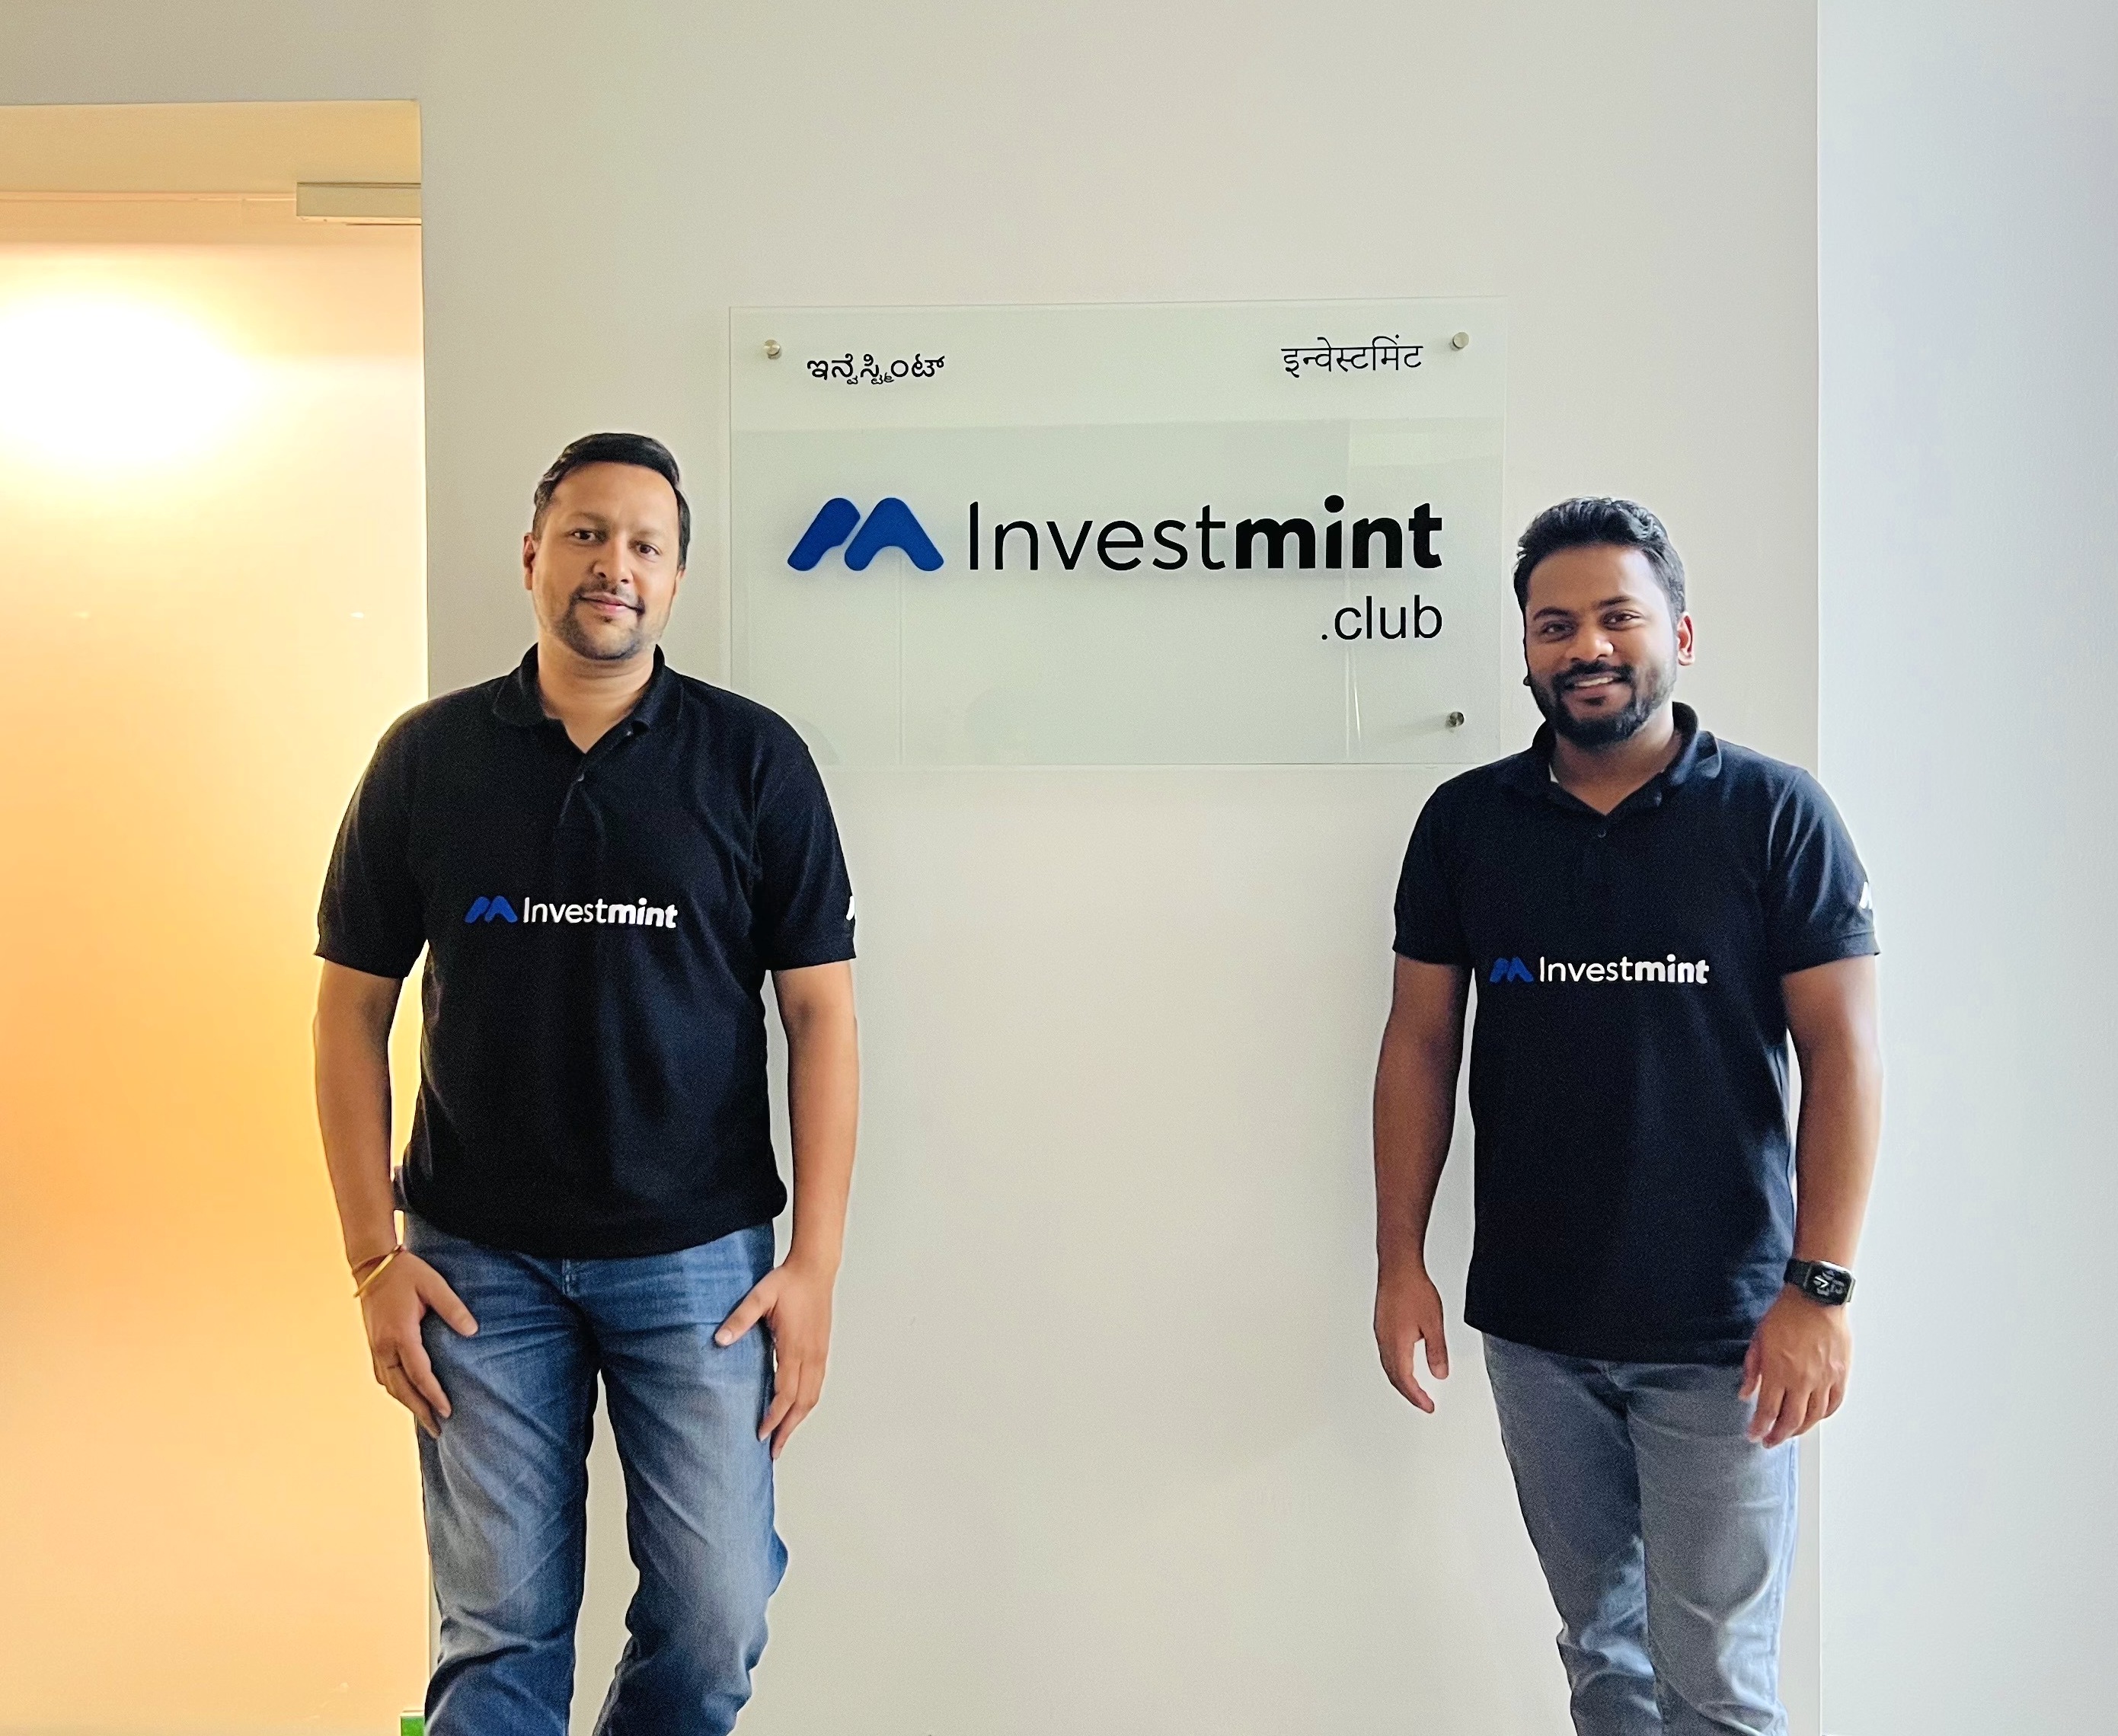 Signal-based Trading Platform Investmint Raises $2 Mn in Seed Funding Led by Nexus Venture Partners